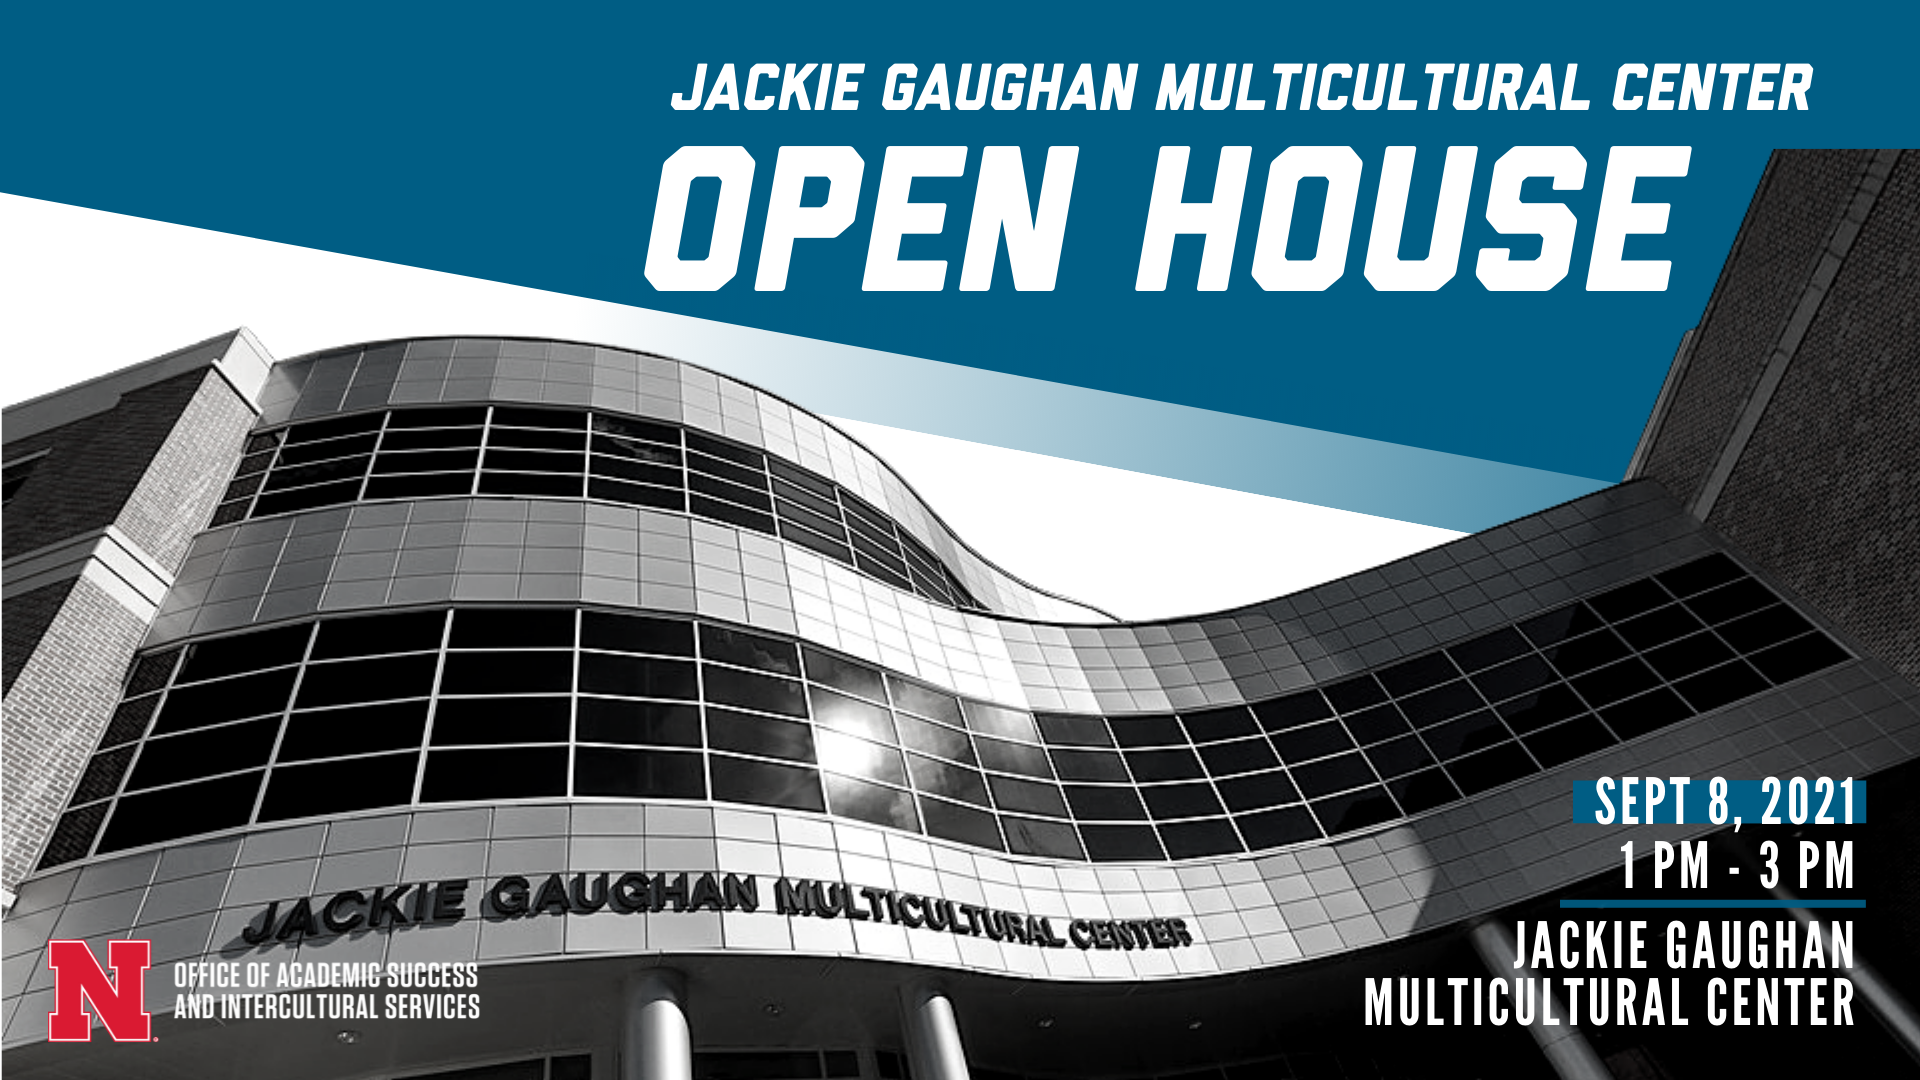 Jackie Gaughan Multicultural Center- Open House, Sept 8, 1 PM- 3PM